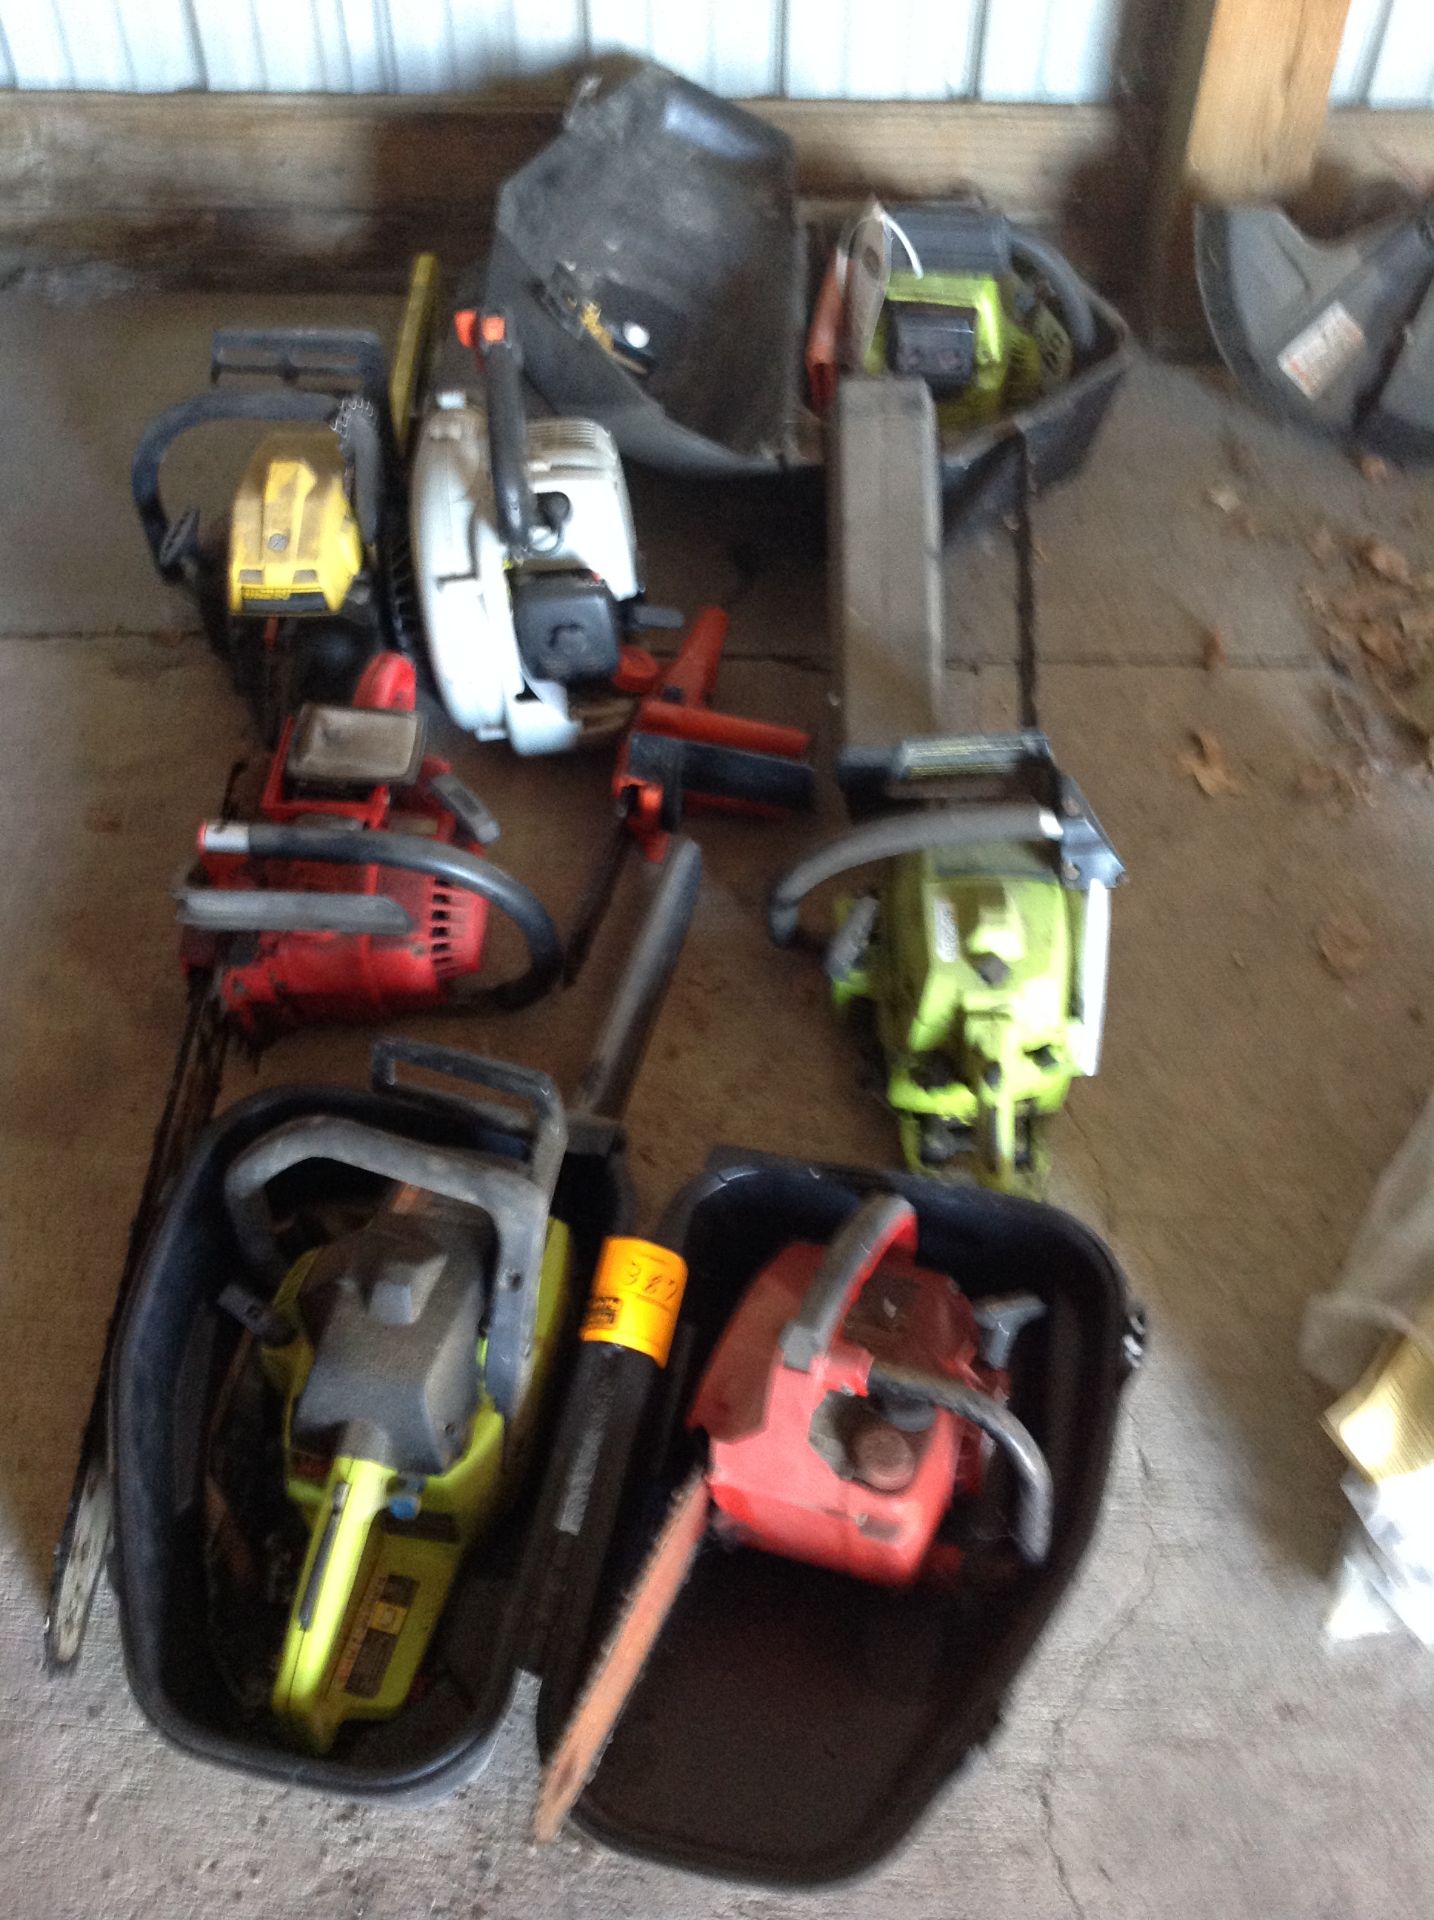 6 Chain Saws for Parts